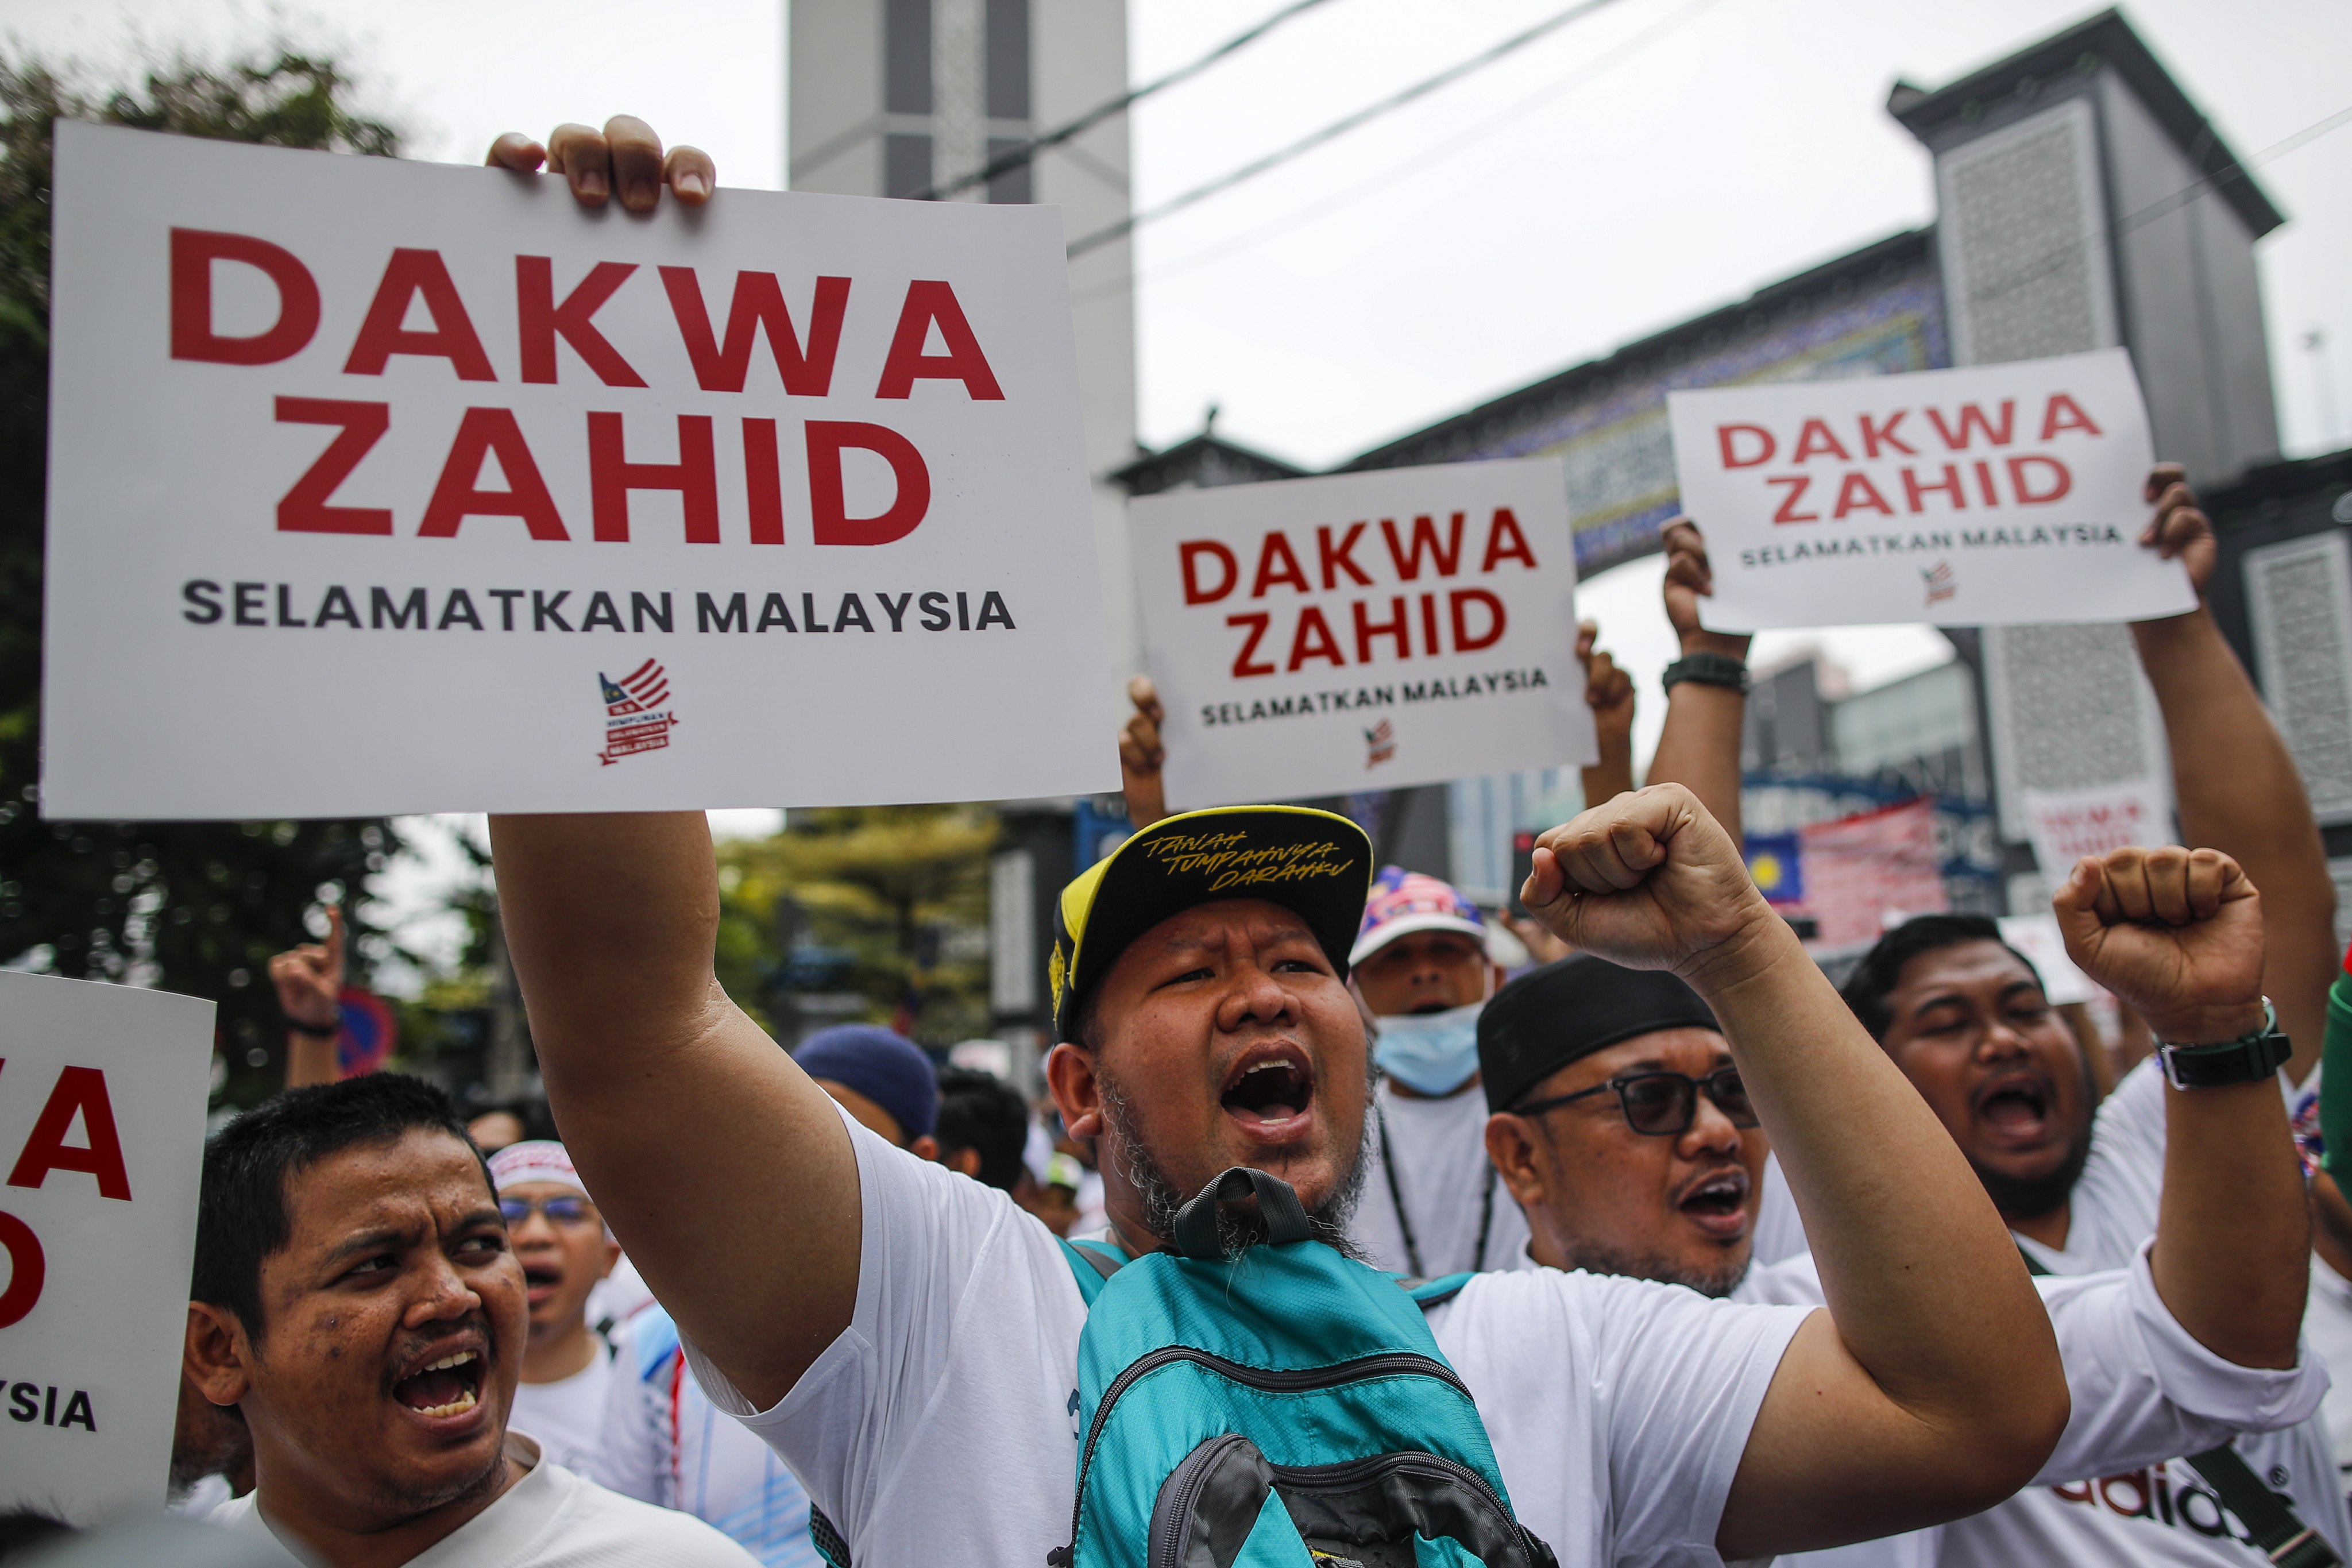 Protesters with placards that say “Prosecute Zahid, Save Malaysia” during the rally in Kuala Lumpur. Photo: EPA-EFE